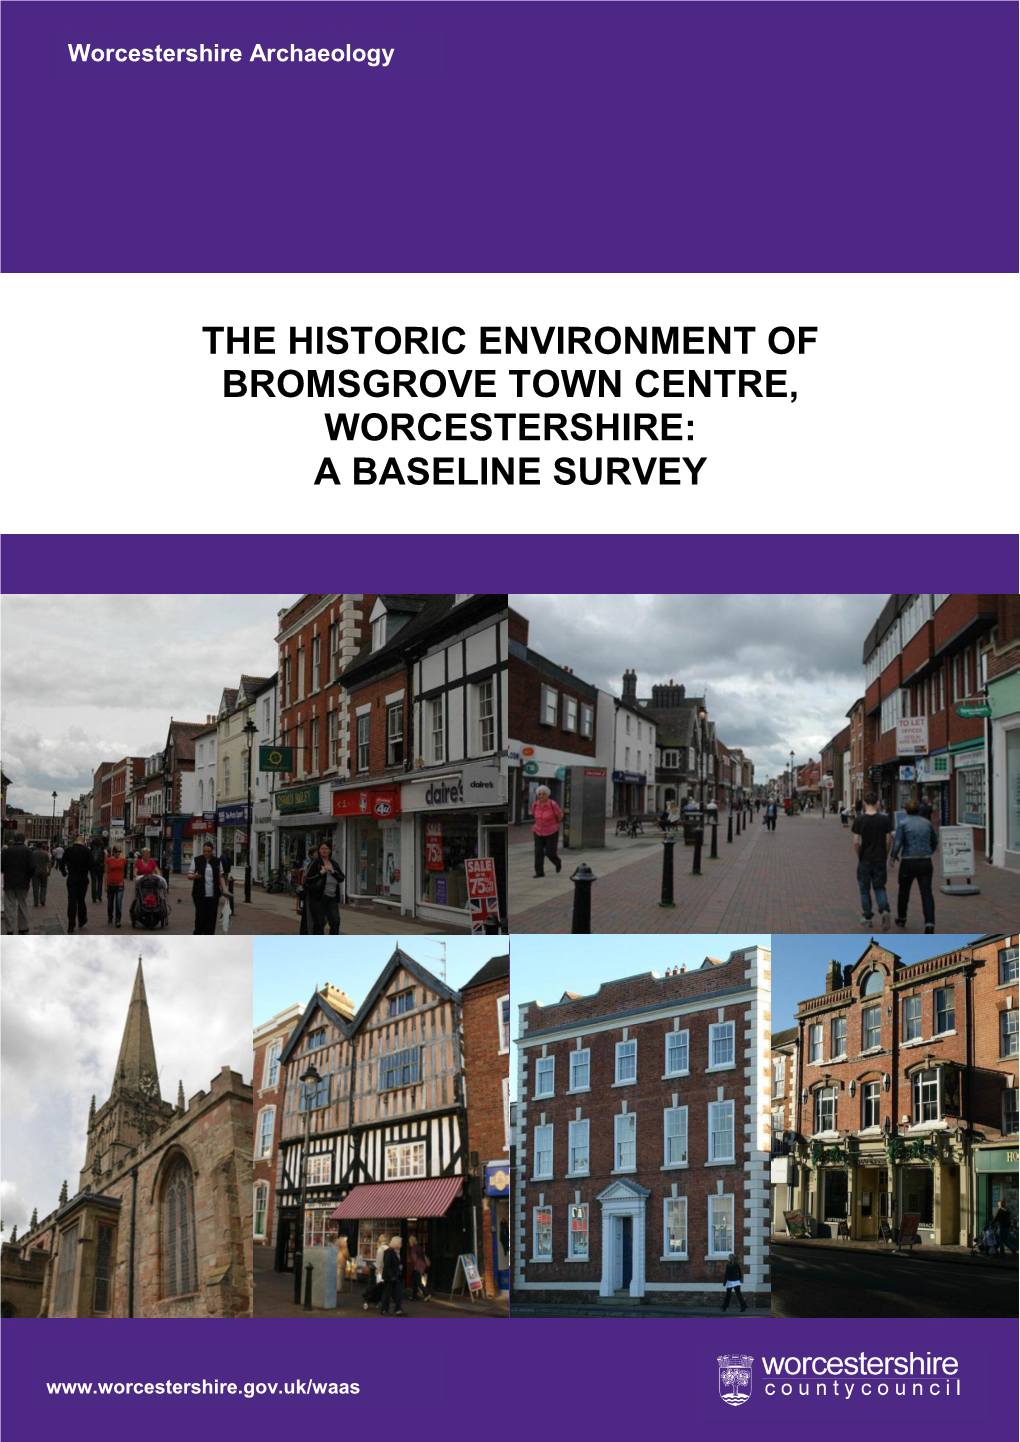 The Historic Environment of Bromsgrove Town Centre, Worcestershire: a Baseline Survey